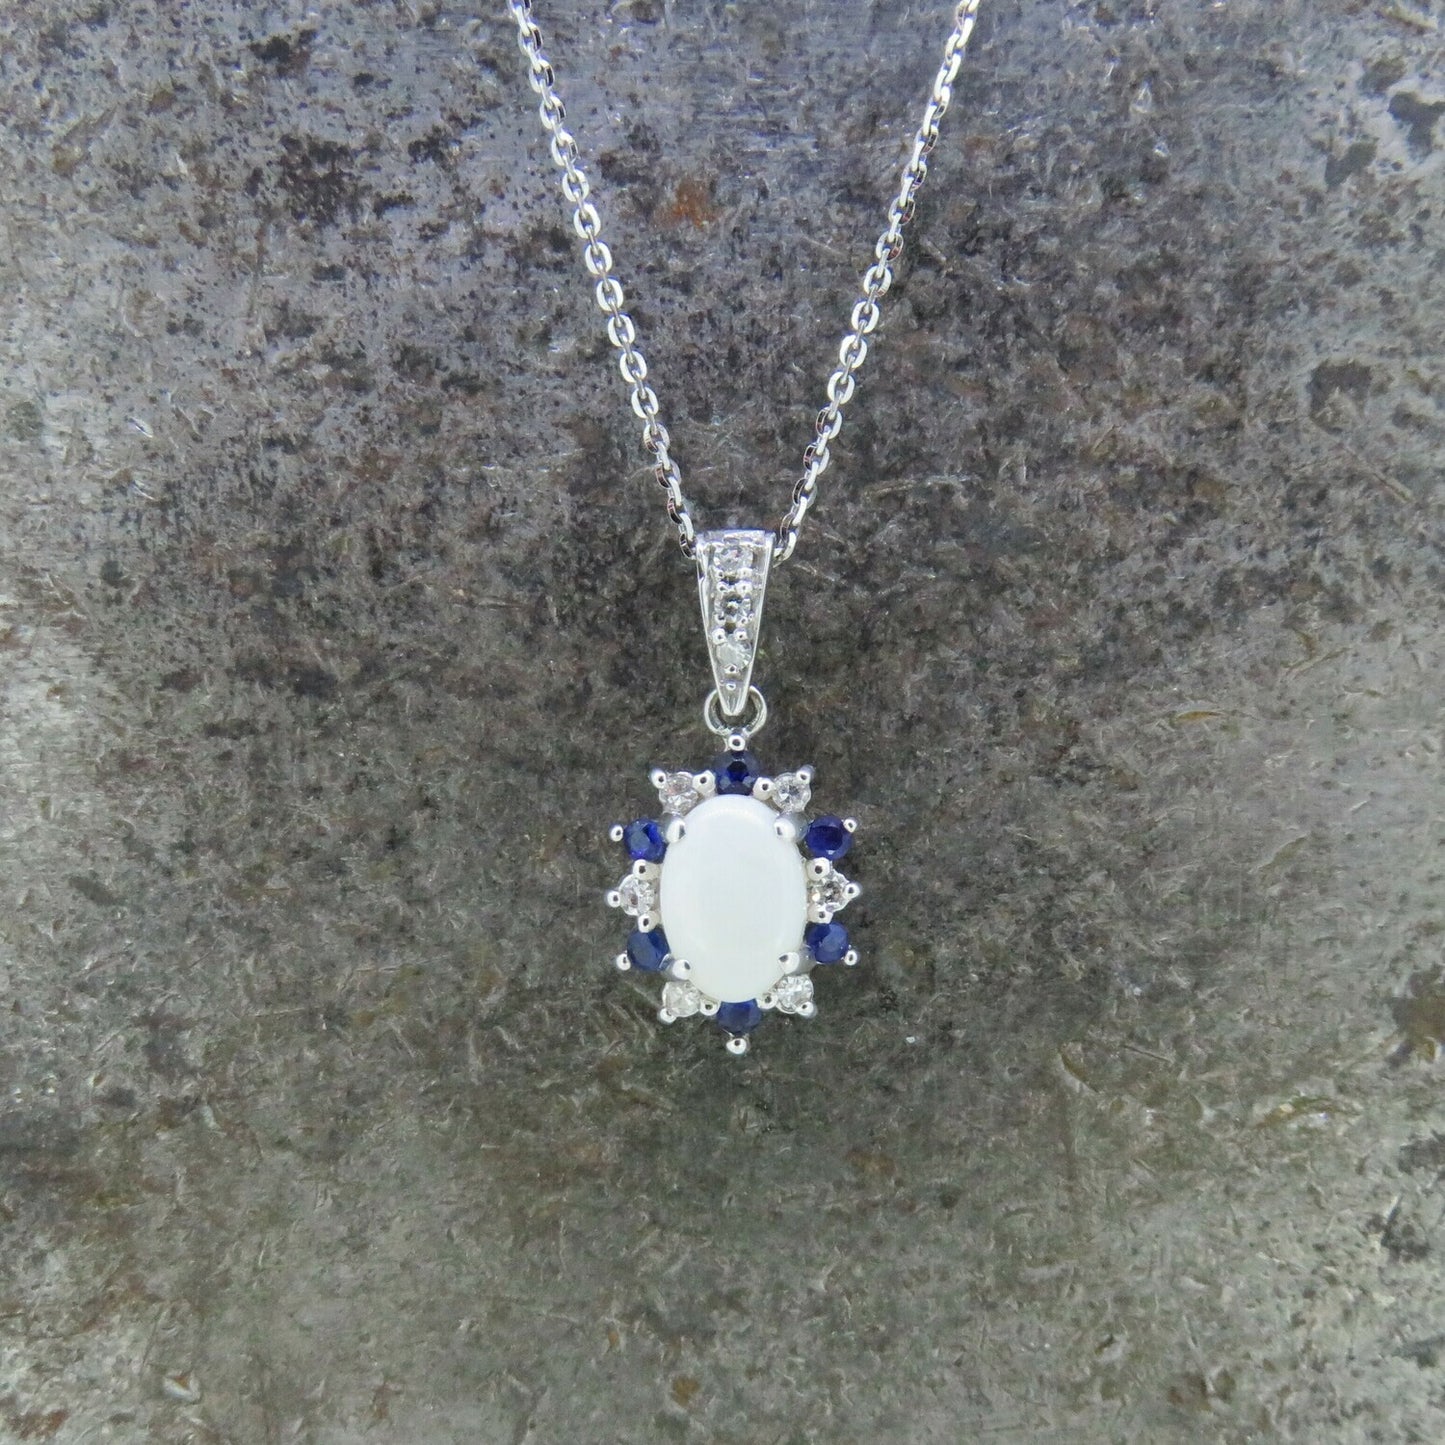 Opal, Sapphire, and Diamond Necklace